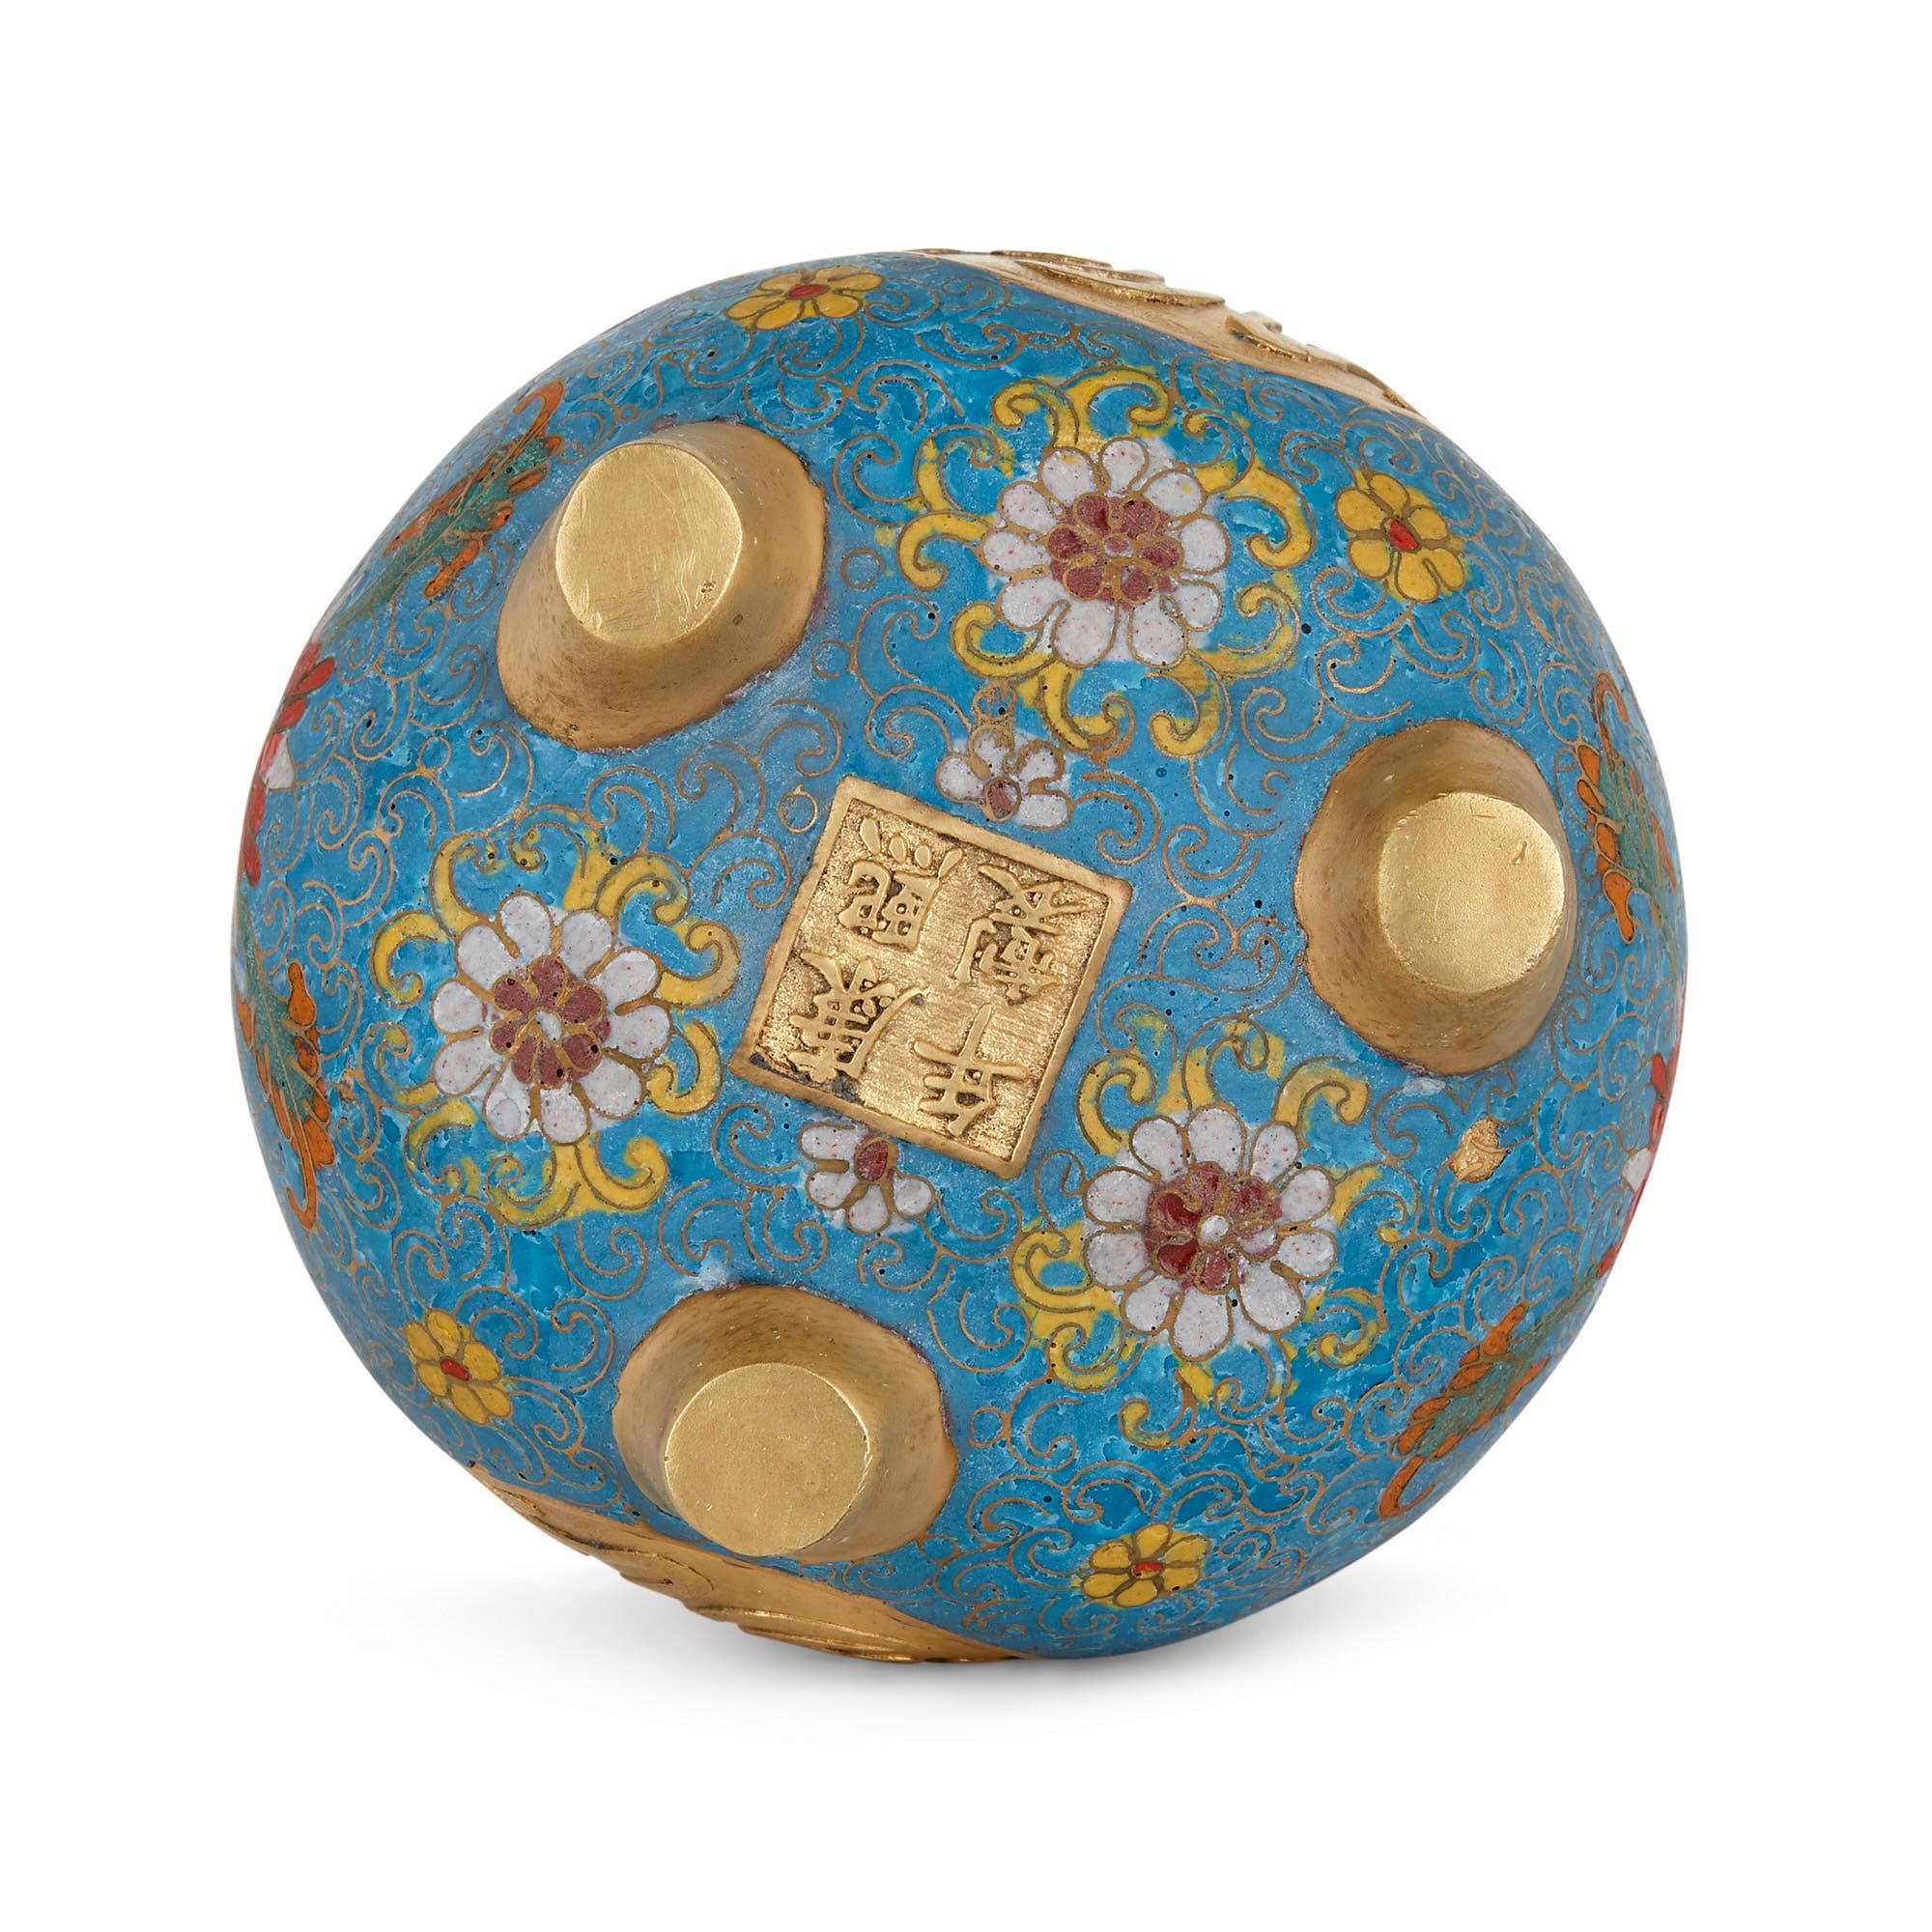 20th Century Chinese Floral Islamic Style Cloisonné Enamel and Ormolu Vase For Sale